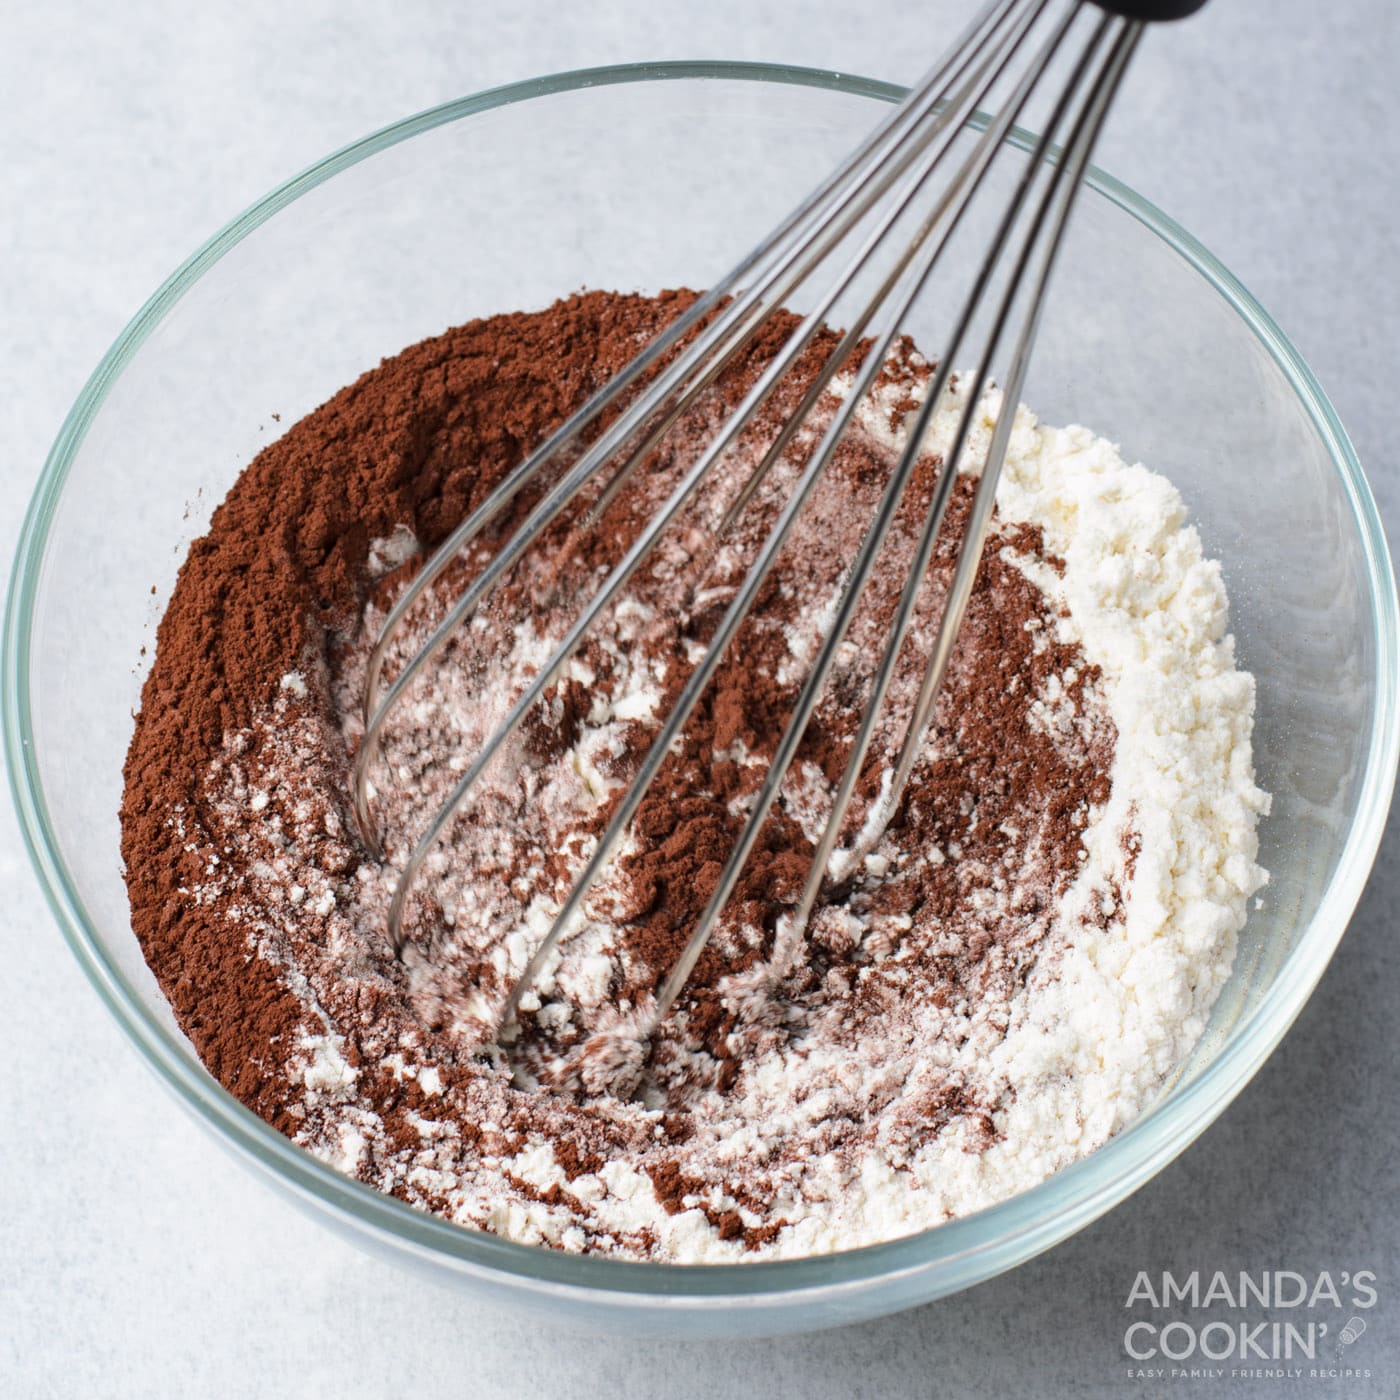 whisking flour and cocoa powder and salt